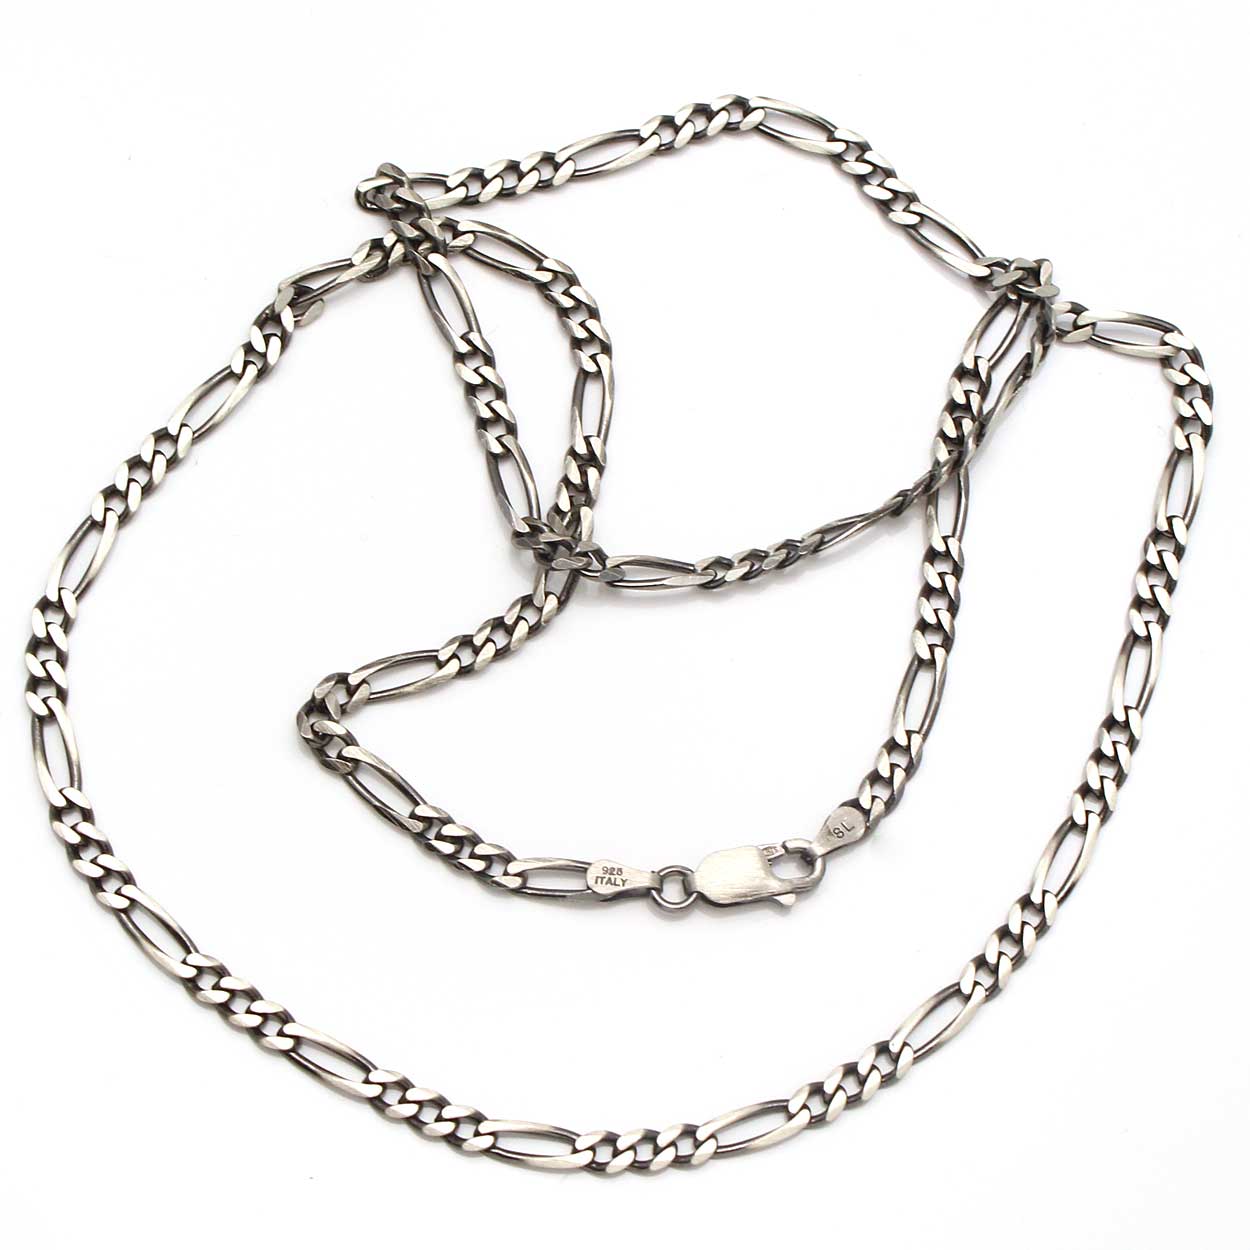 22" Manufactured Sterling Silver Chain - Italy